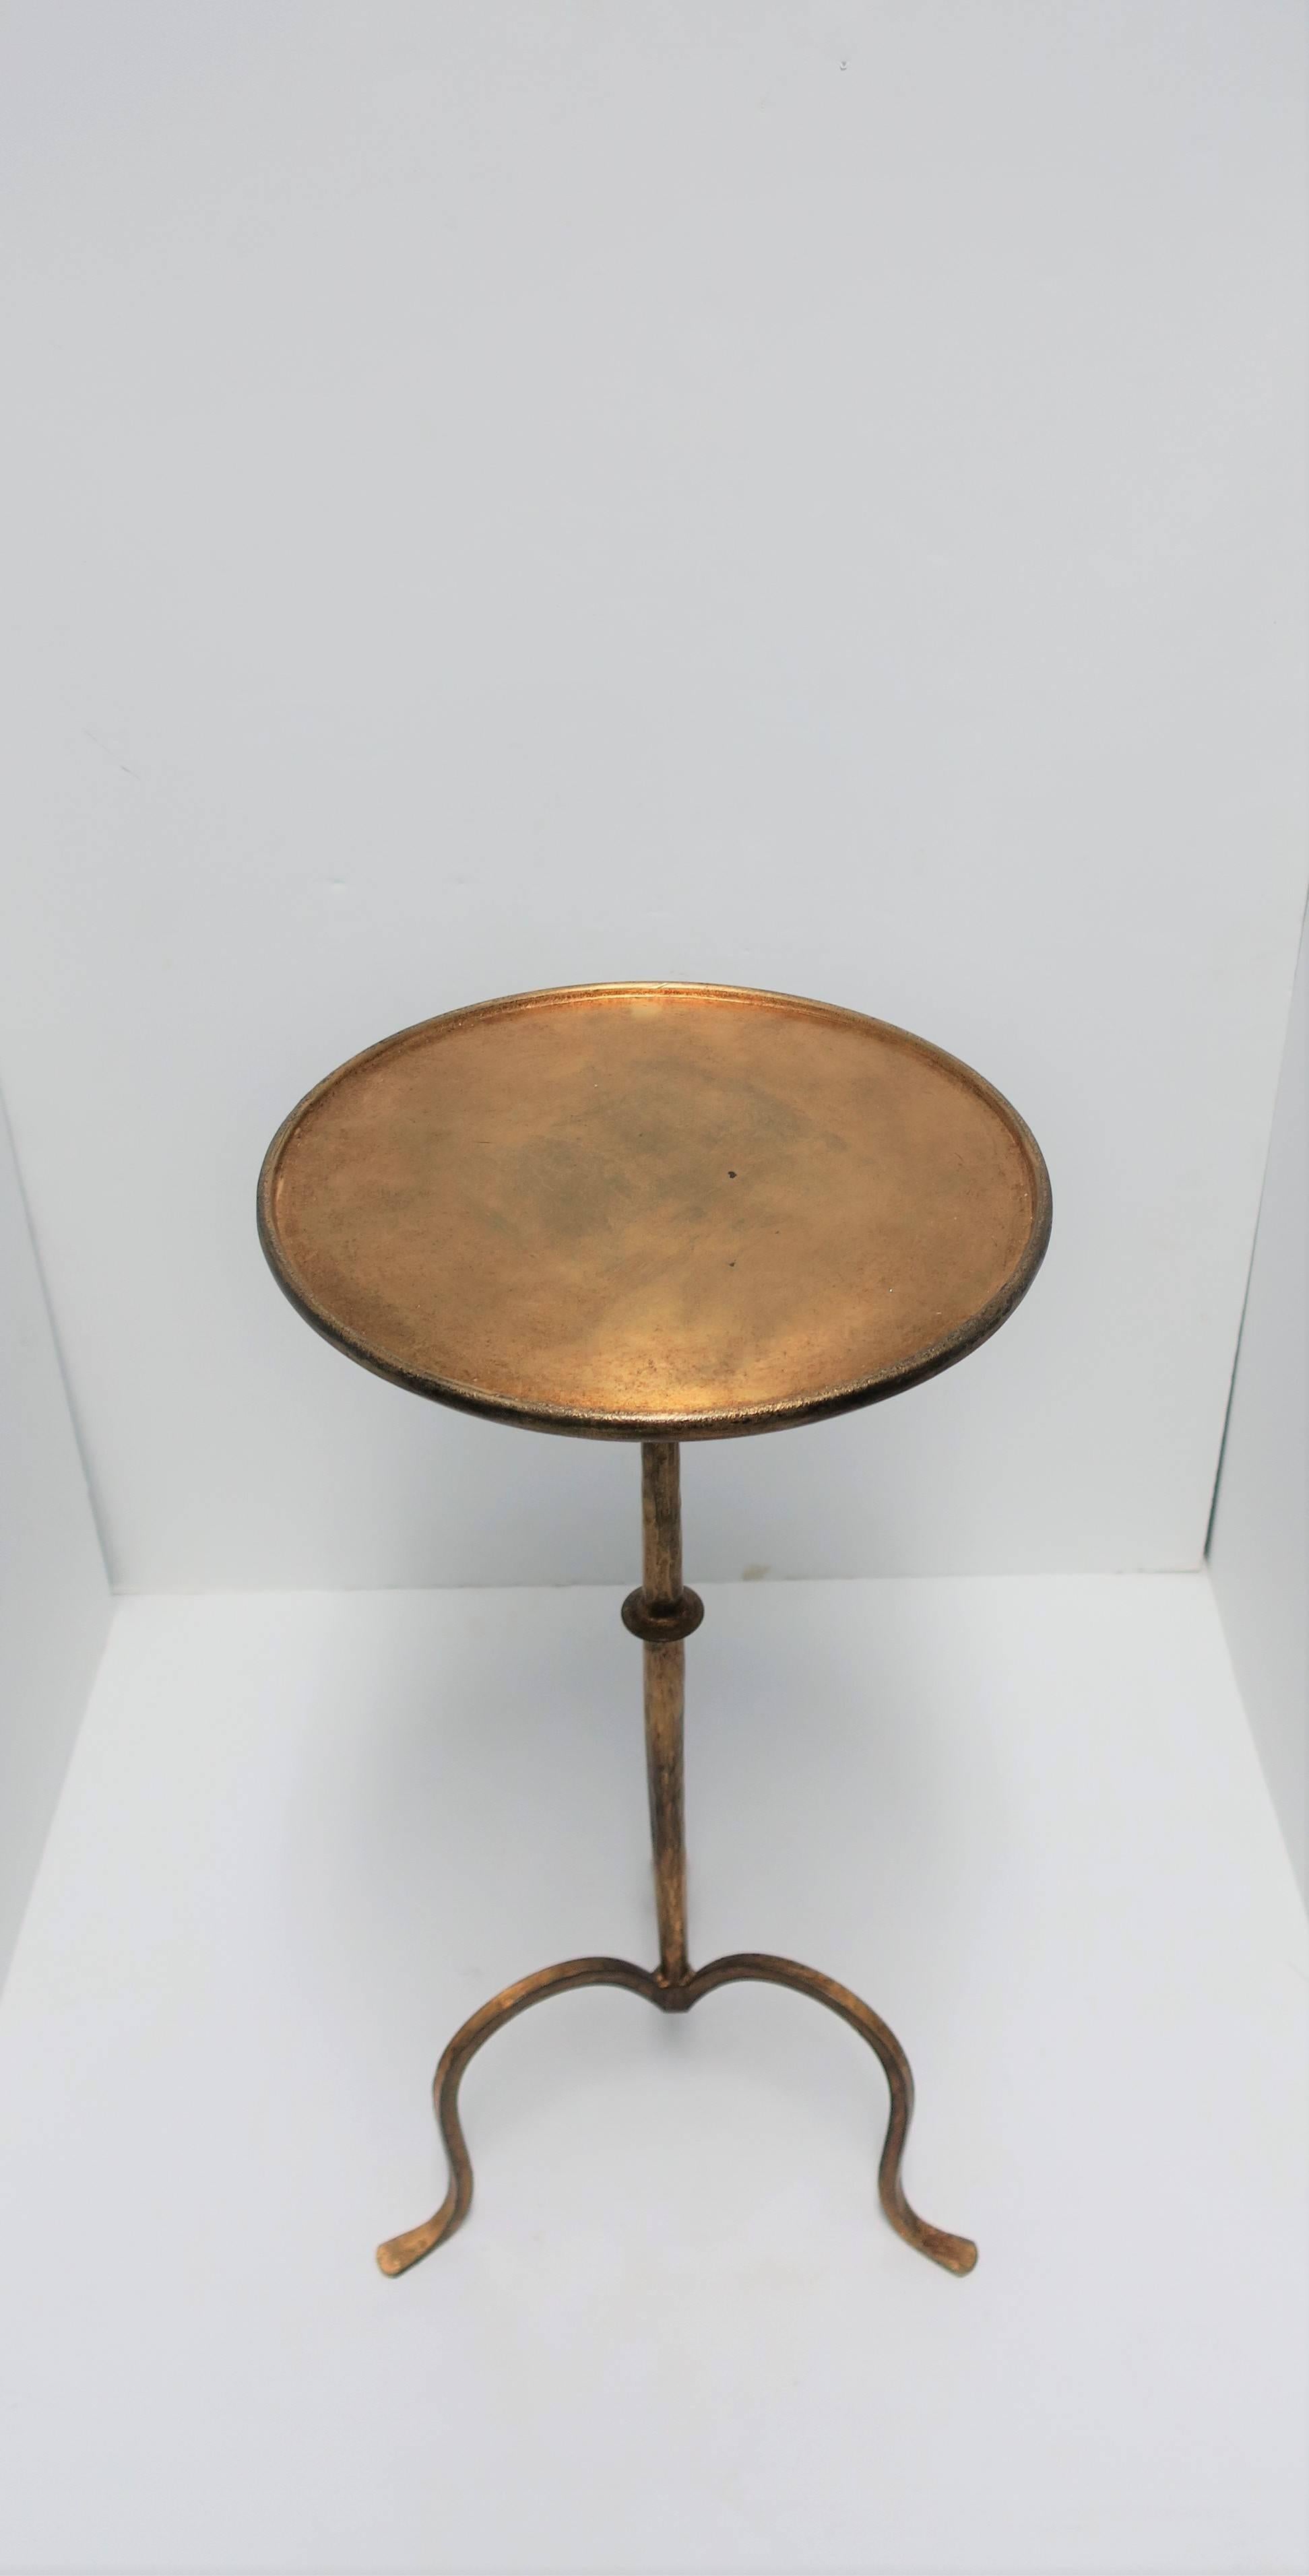 Iron Gold Gilt Round Side Table with Tri-Pod Base, 21st Century